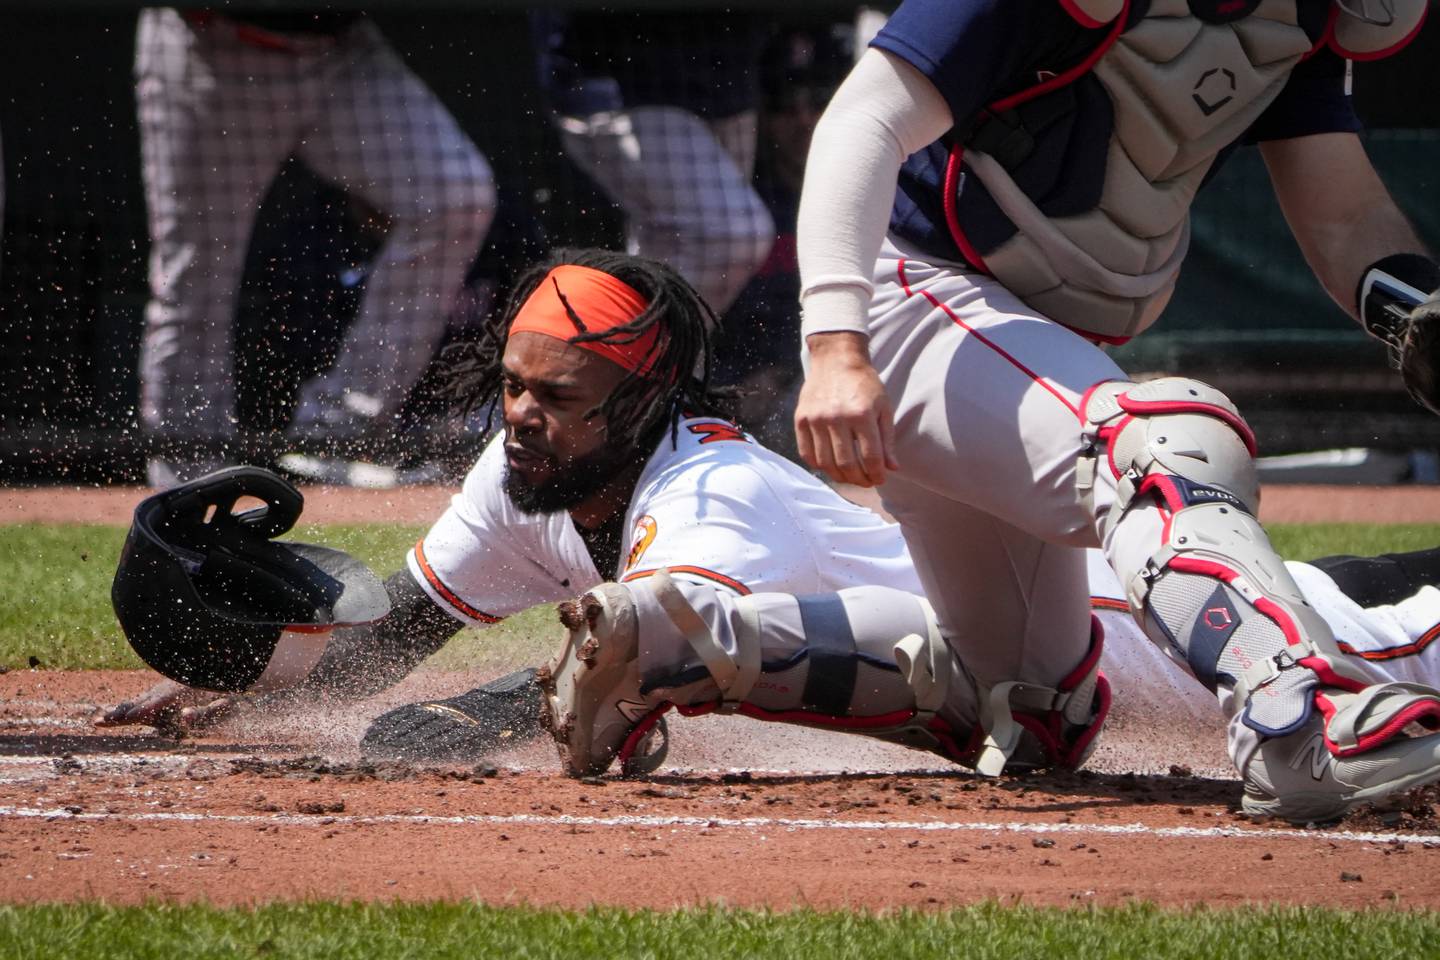 Baltimore Orioles outfielder Cedric Mullins (31) slides to home plate safely in a baseball game against the Boston Red Sox at Camden Yards on Wednesday, April 26. The Orioles played the Red Sox in the third game of the series, with the winner of Wednesday's game taking the series.